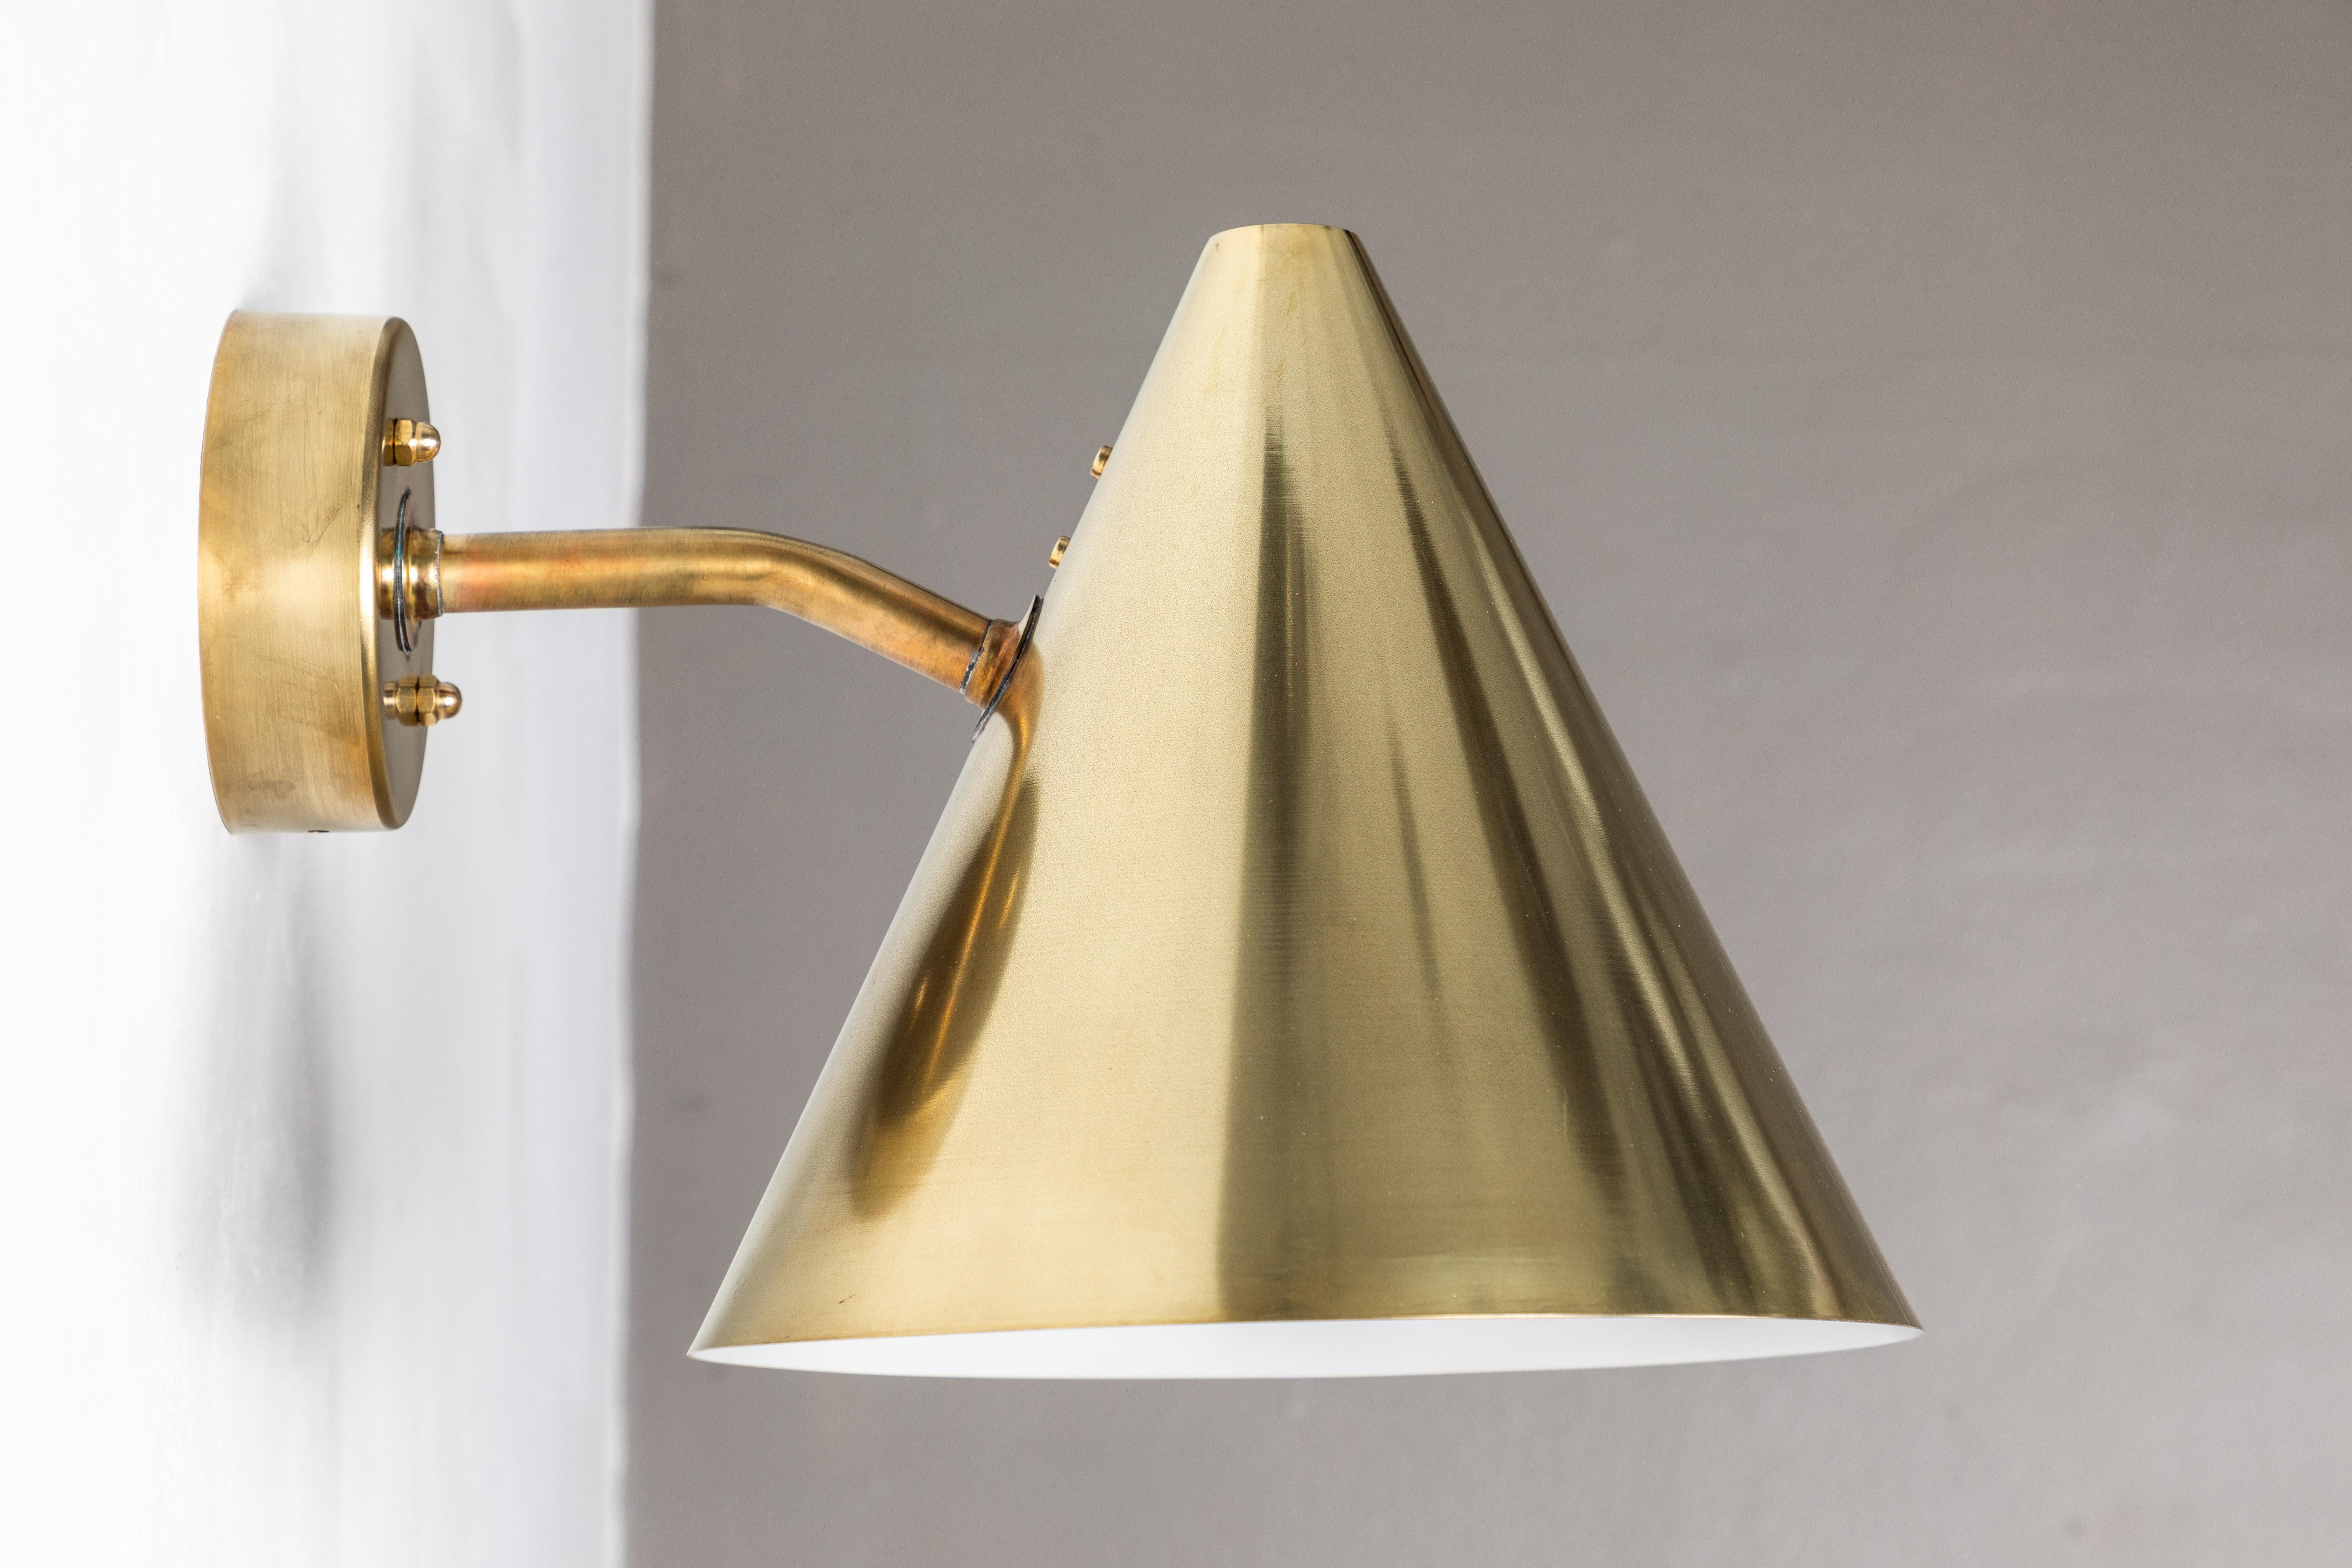 Pair of Hans-Agne Jakobsson 'Tratten' Raw Brass Outdoor Sconces For Sale 5